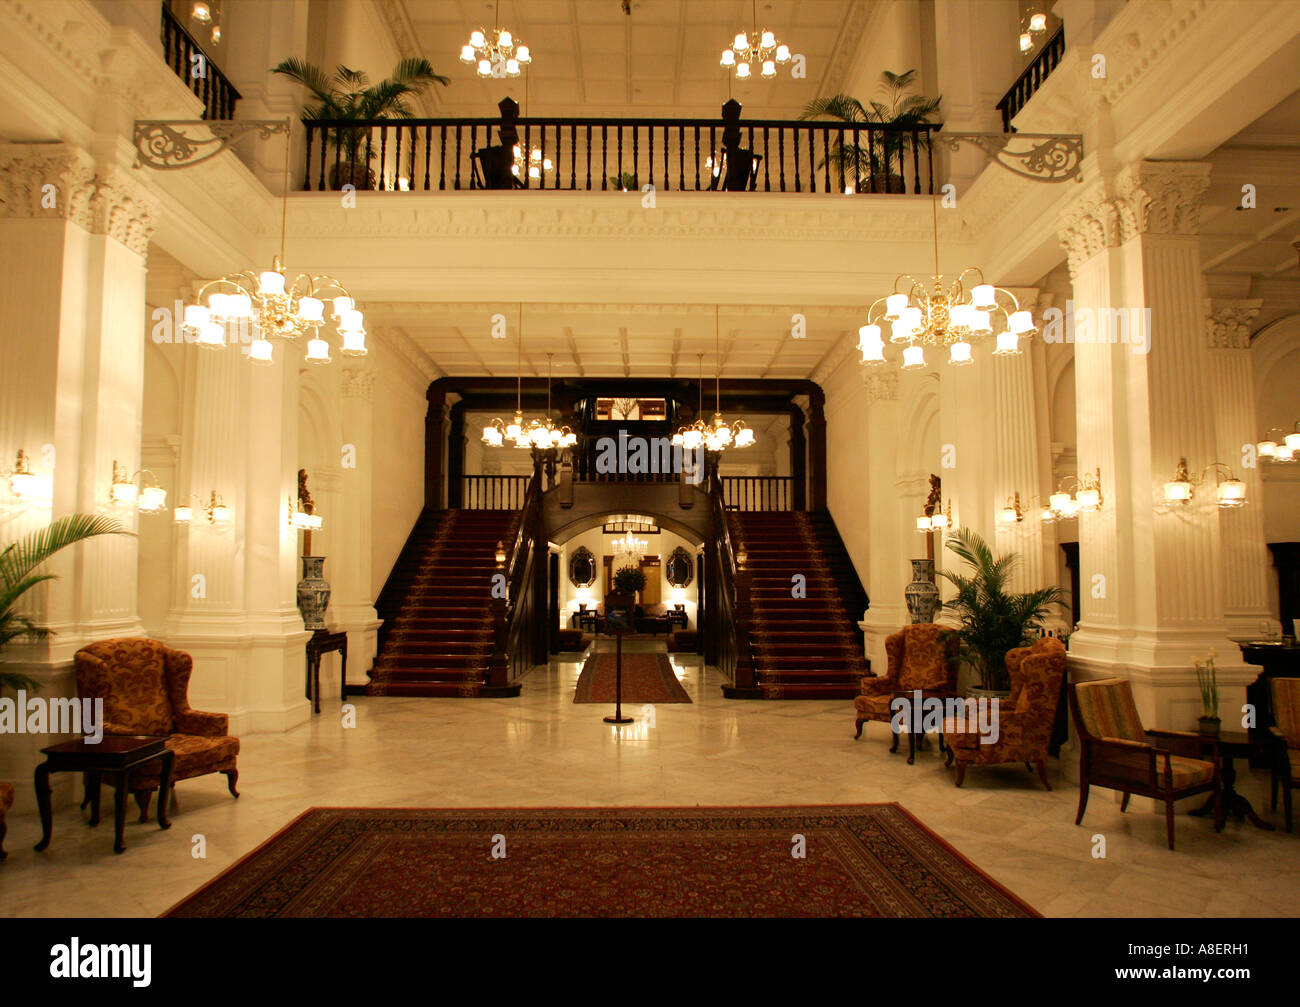 Lobby Of The Raffles Hotel In Singapore A8ERH1 